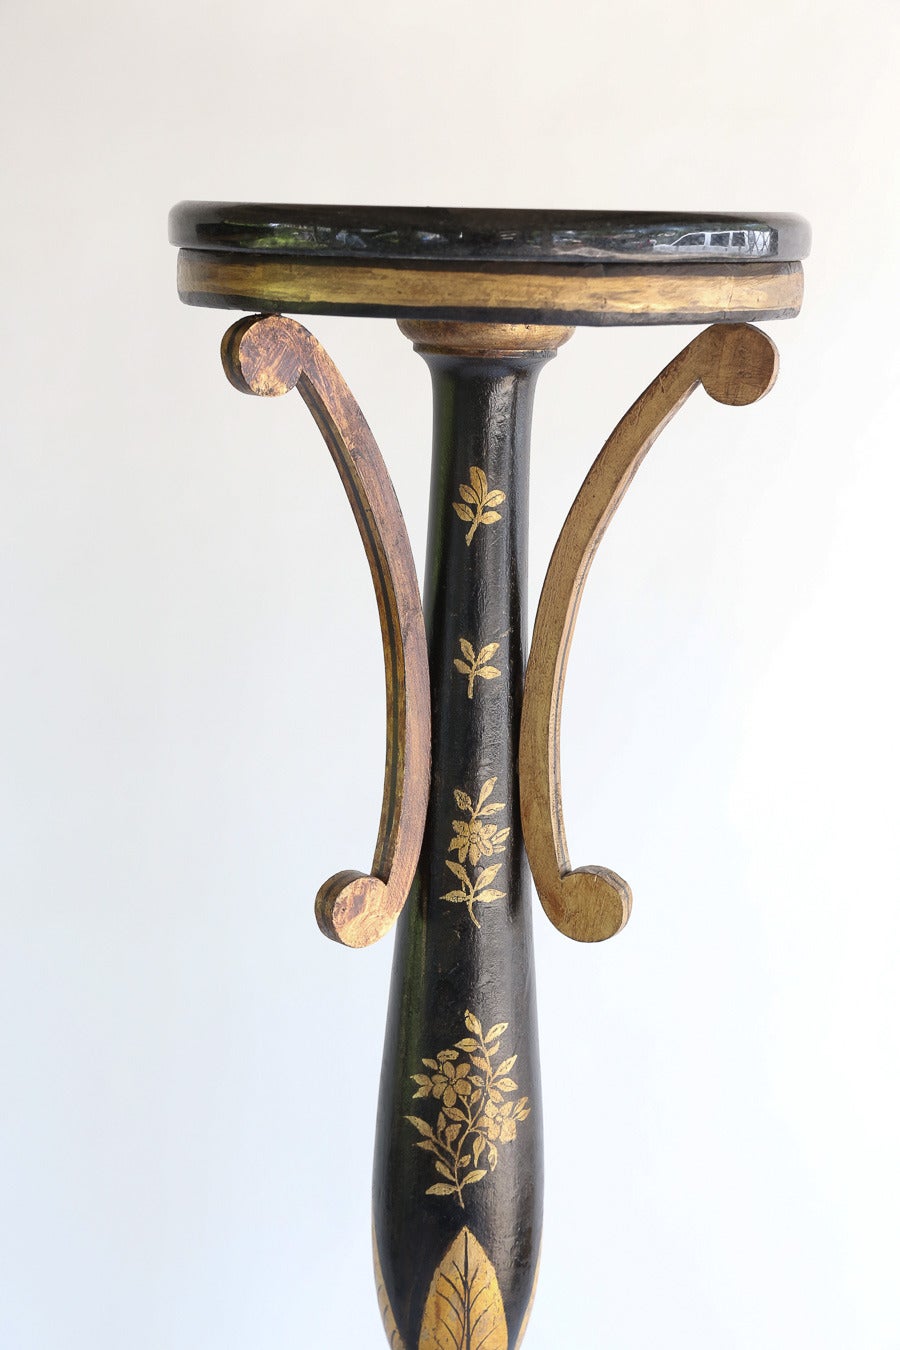 Carved Handsomely Decorated English Regency Torchère For Sale